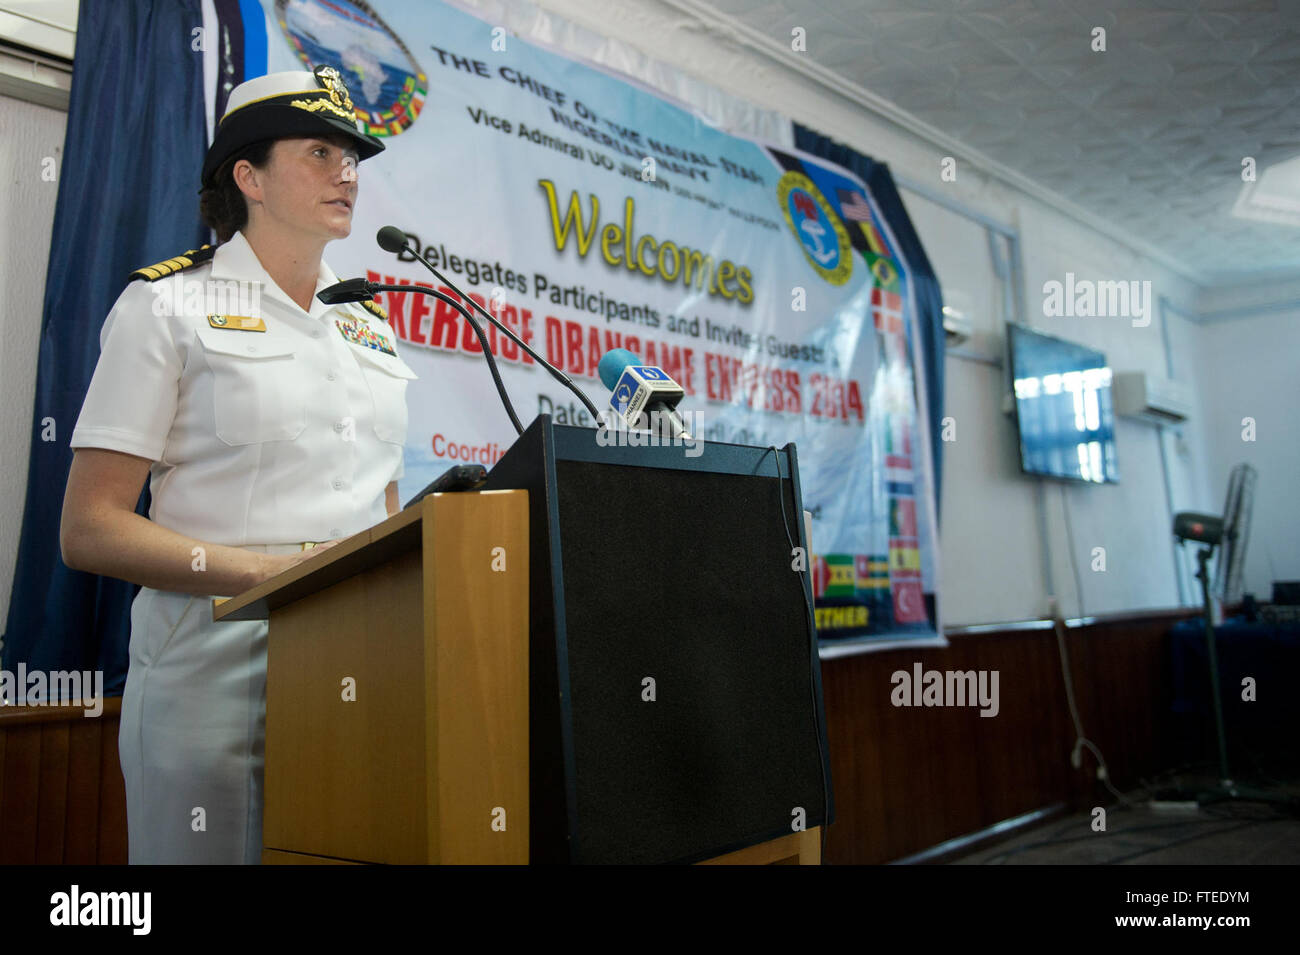 140423-N-IY142-121 LAGOS, Nigeria (April 23, 2014) - U.S. Navy Capt. Nancy Lacore, exercise director for Obangame Express 2014, gives her closing remarks during the exercise closing ceremony at the Nigerian navy’s Western Naval Command headquarters. Obangame Express is a U.S. Africa Command-sponsored multinational maritime exercise designed to increase maritime safety and security in the Gulf of Guinea. (U.S. Navy photo by Mass Communication Specialist 2nd Class John Herman/Released) Stock Photo